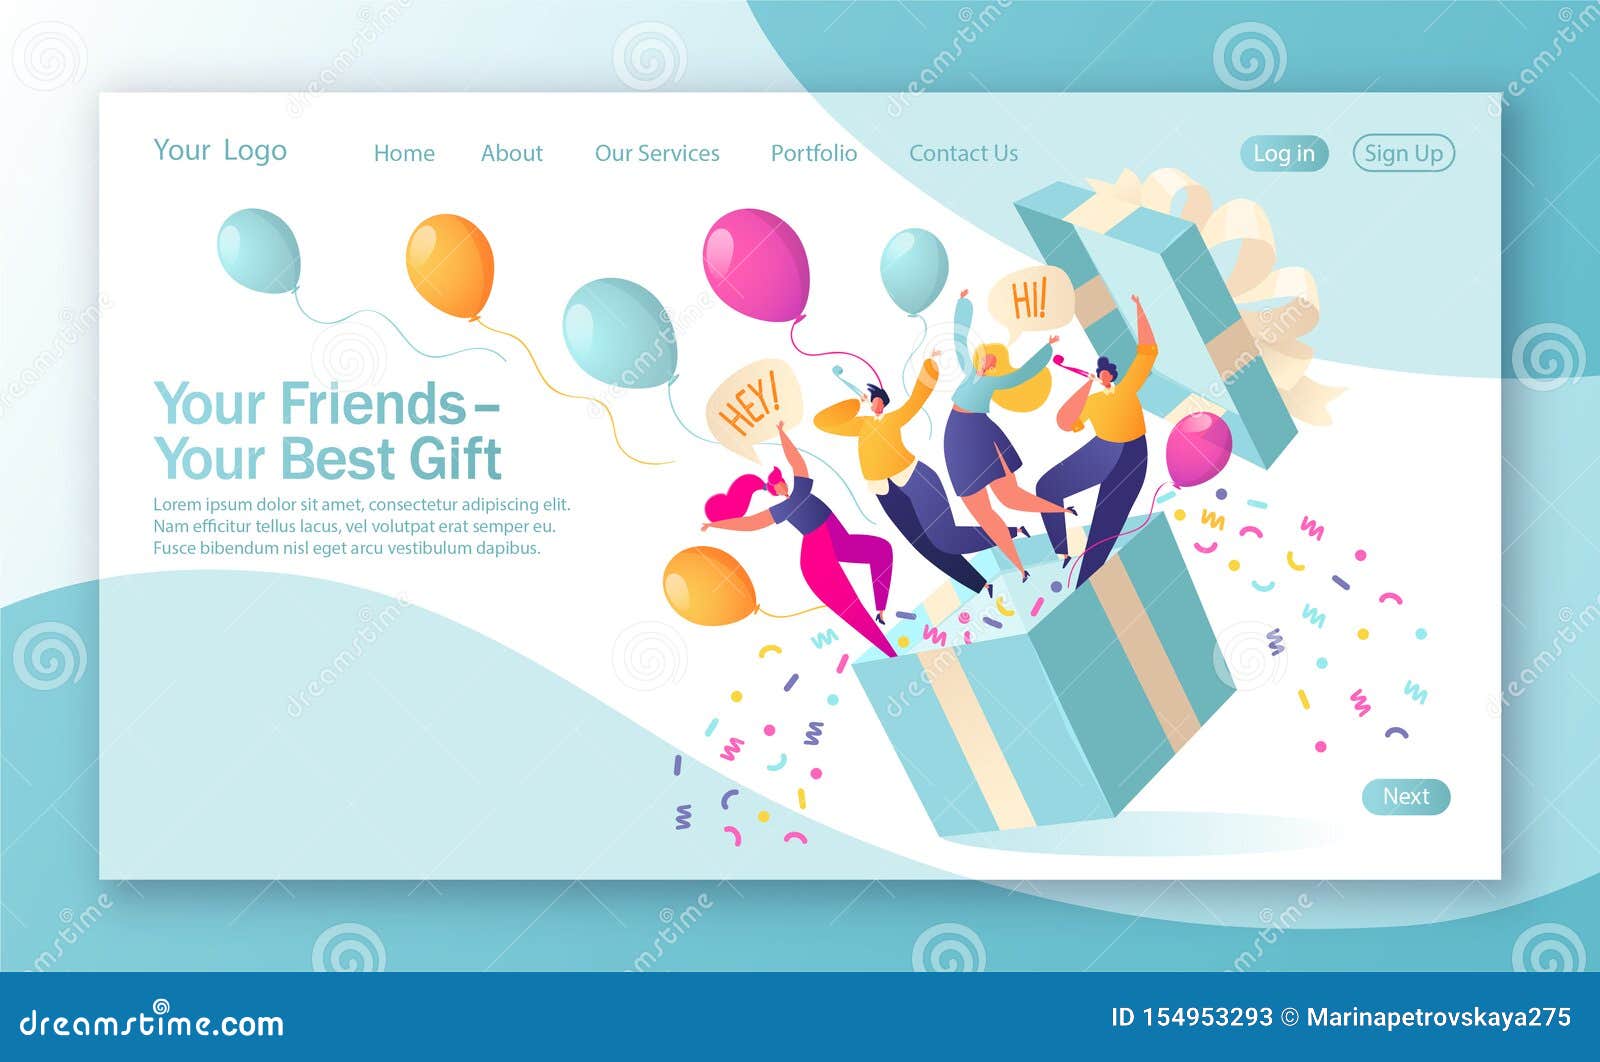 concept of landing page on birthday celebrations theme.